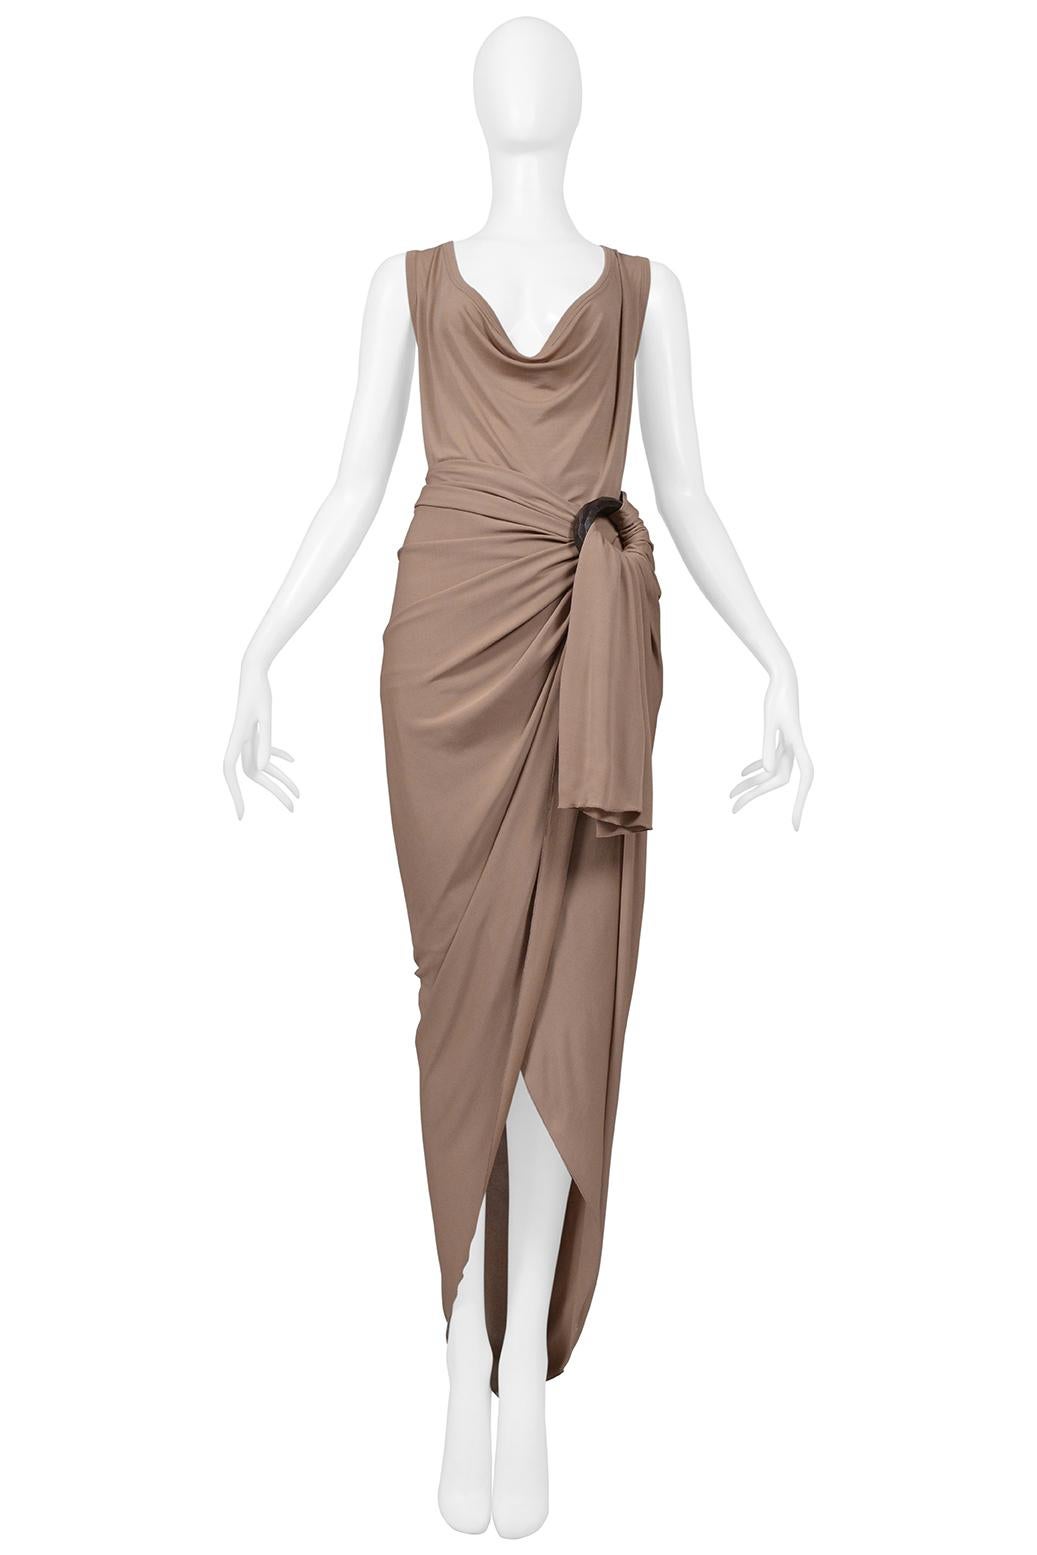 Jean Paul Gaultier Beige Draped Top And Skirt With Decorative Hardware In Excellent Condition For Sale In Los Angeles, CA